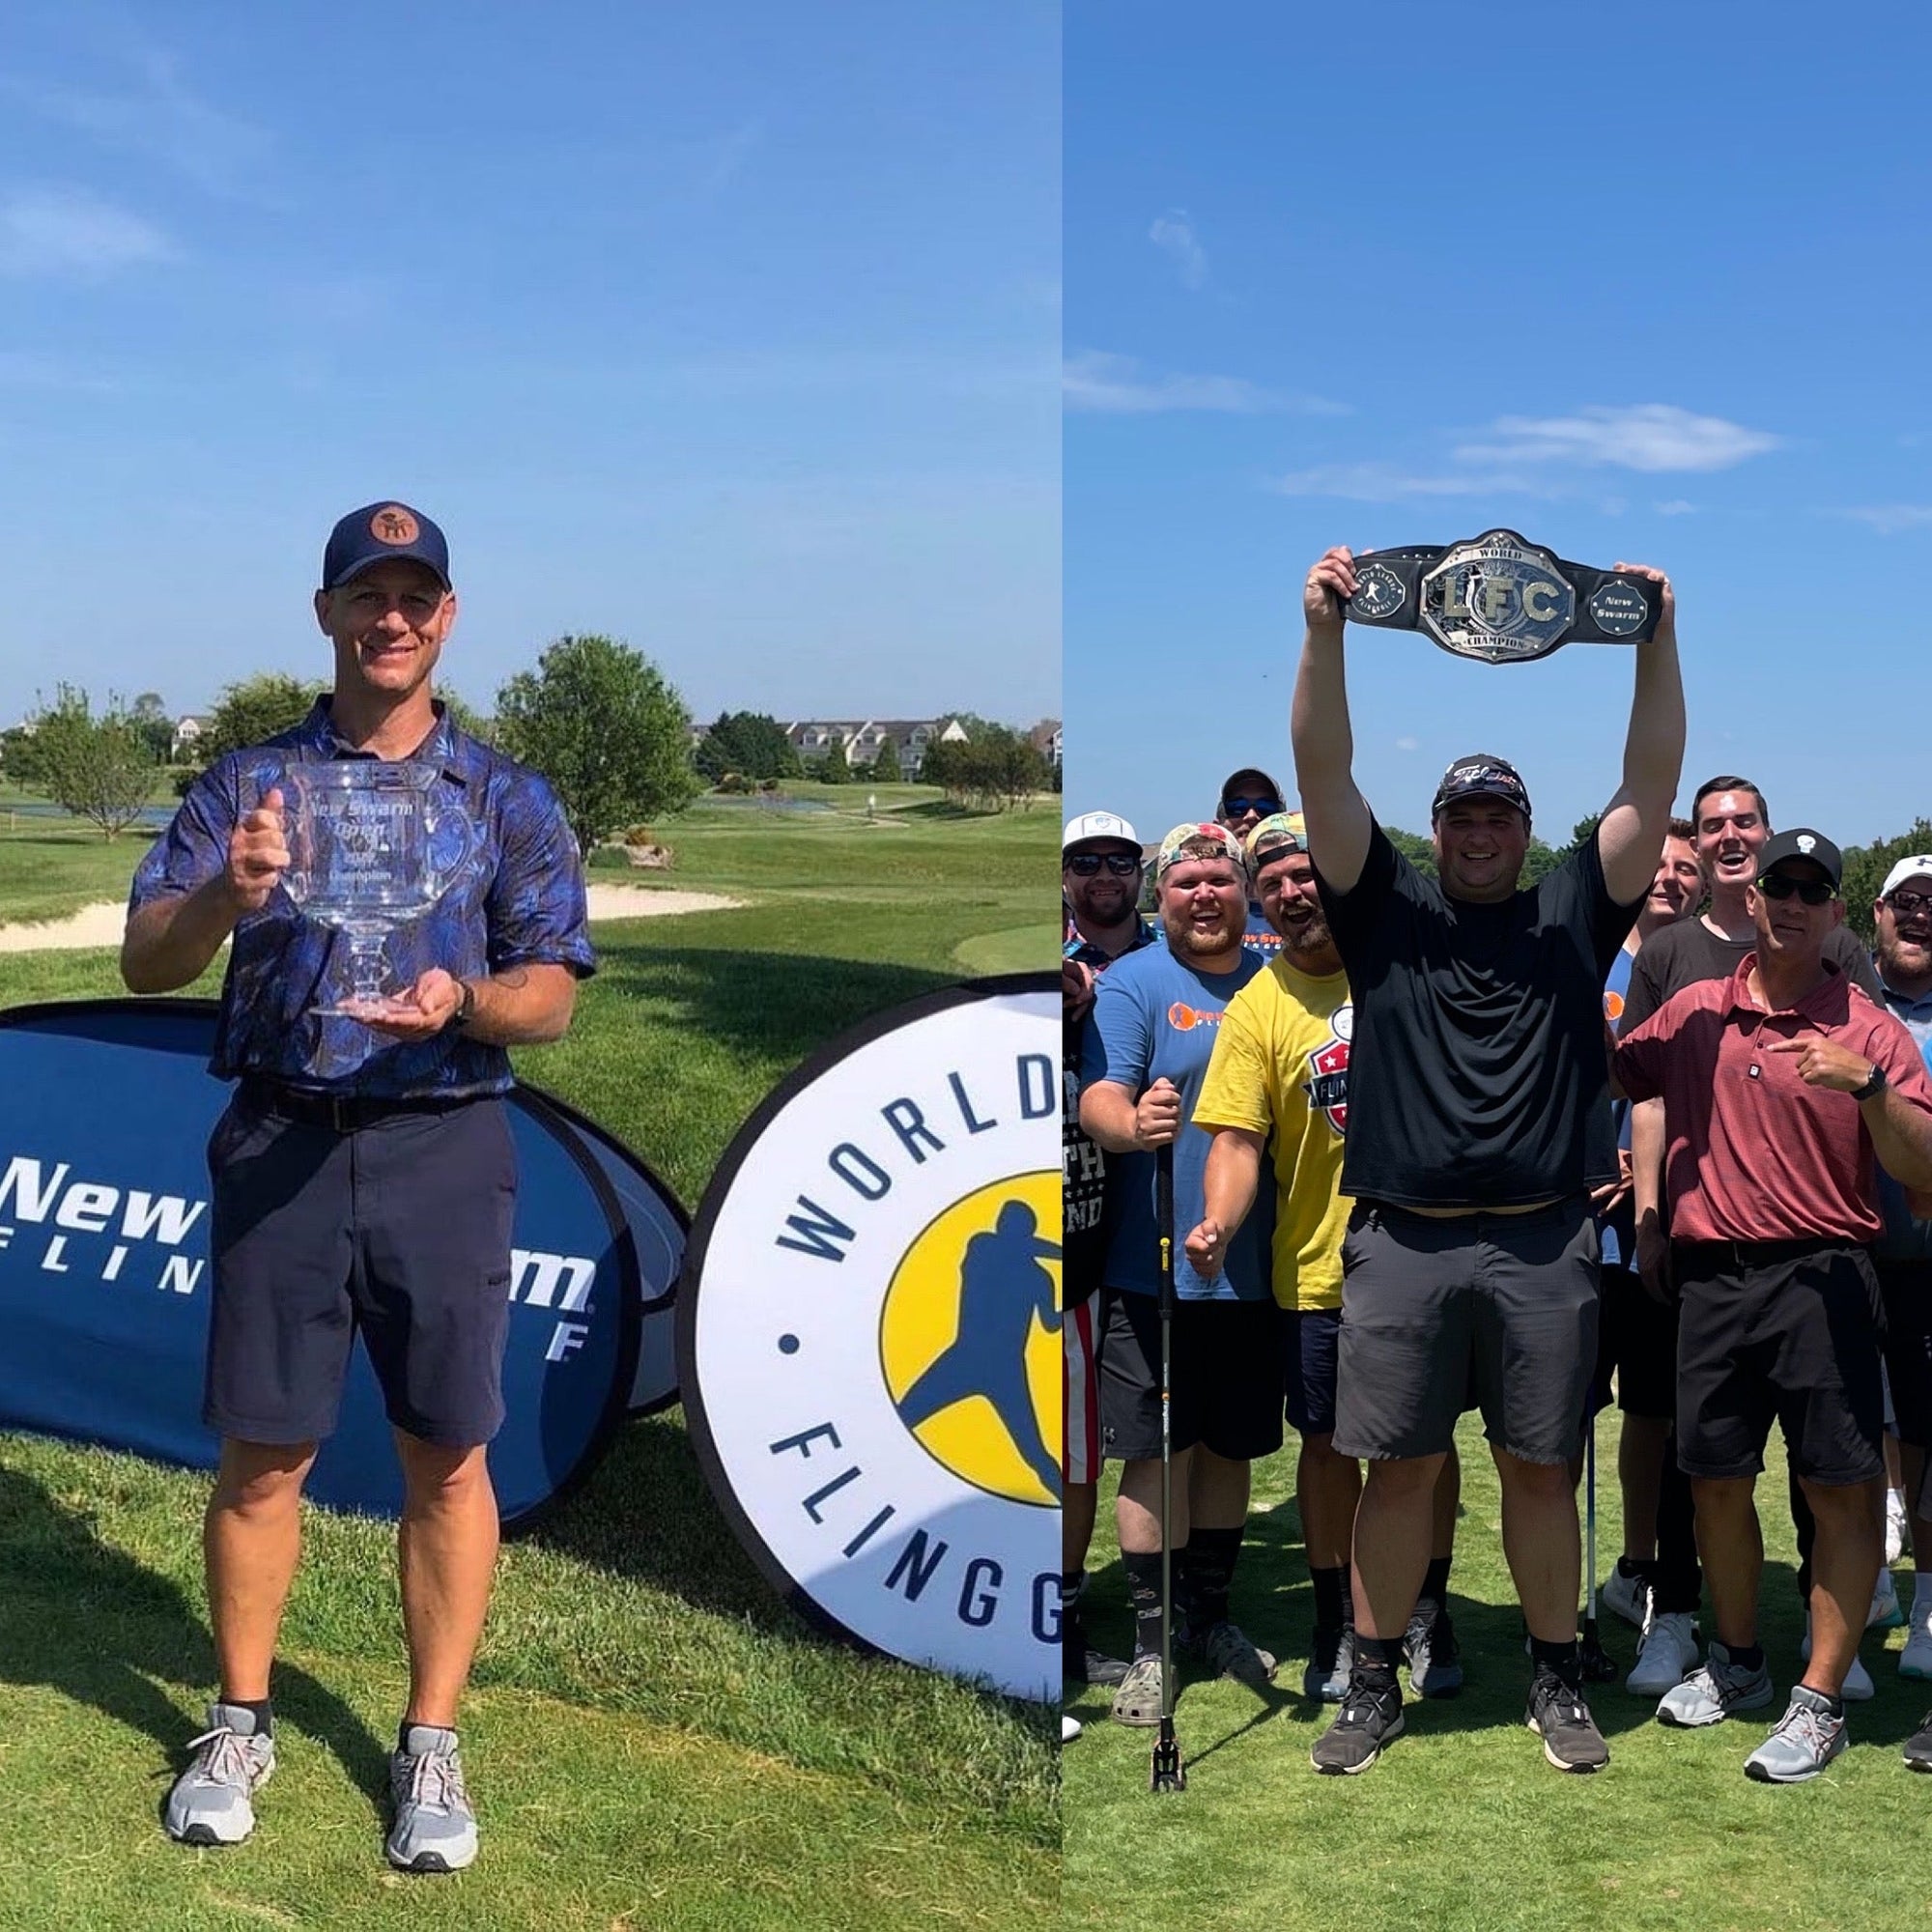 World League FlingGolf Crowns Two World Champions at the New Swarm Classic